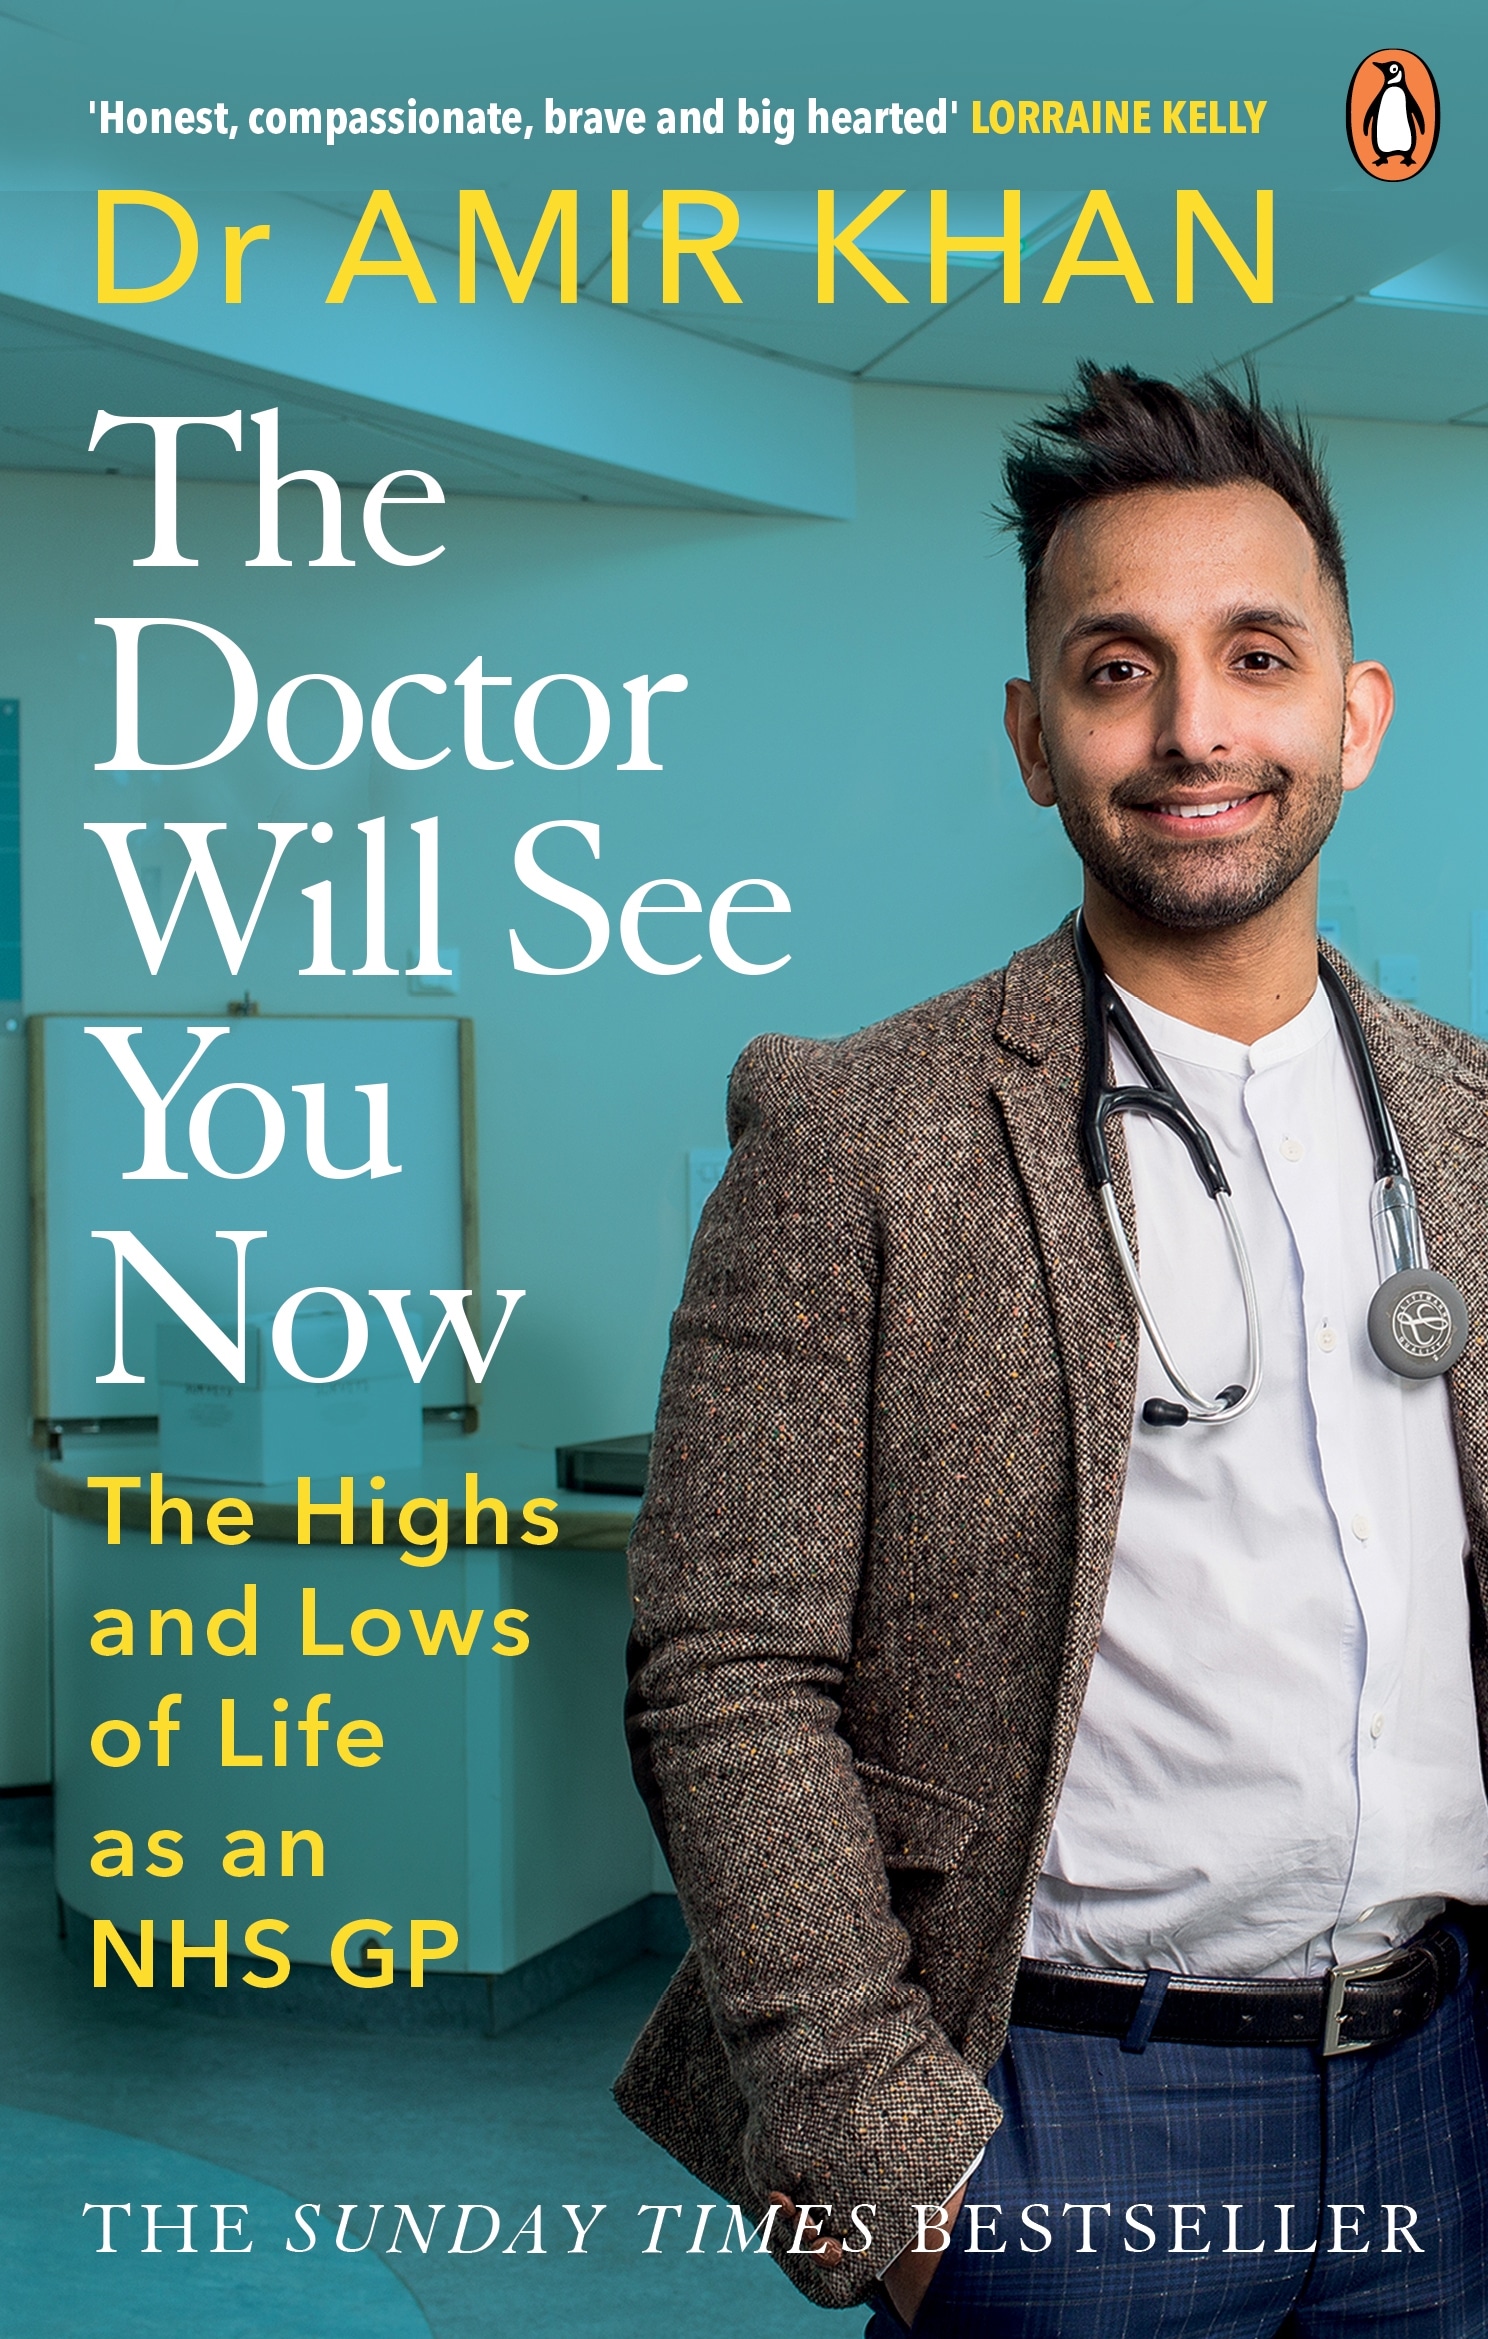 Book “The Doctor Will See You Now” by Amir Khan — August 5, 2021